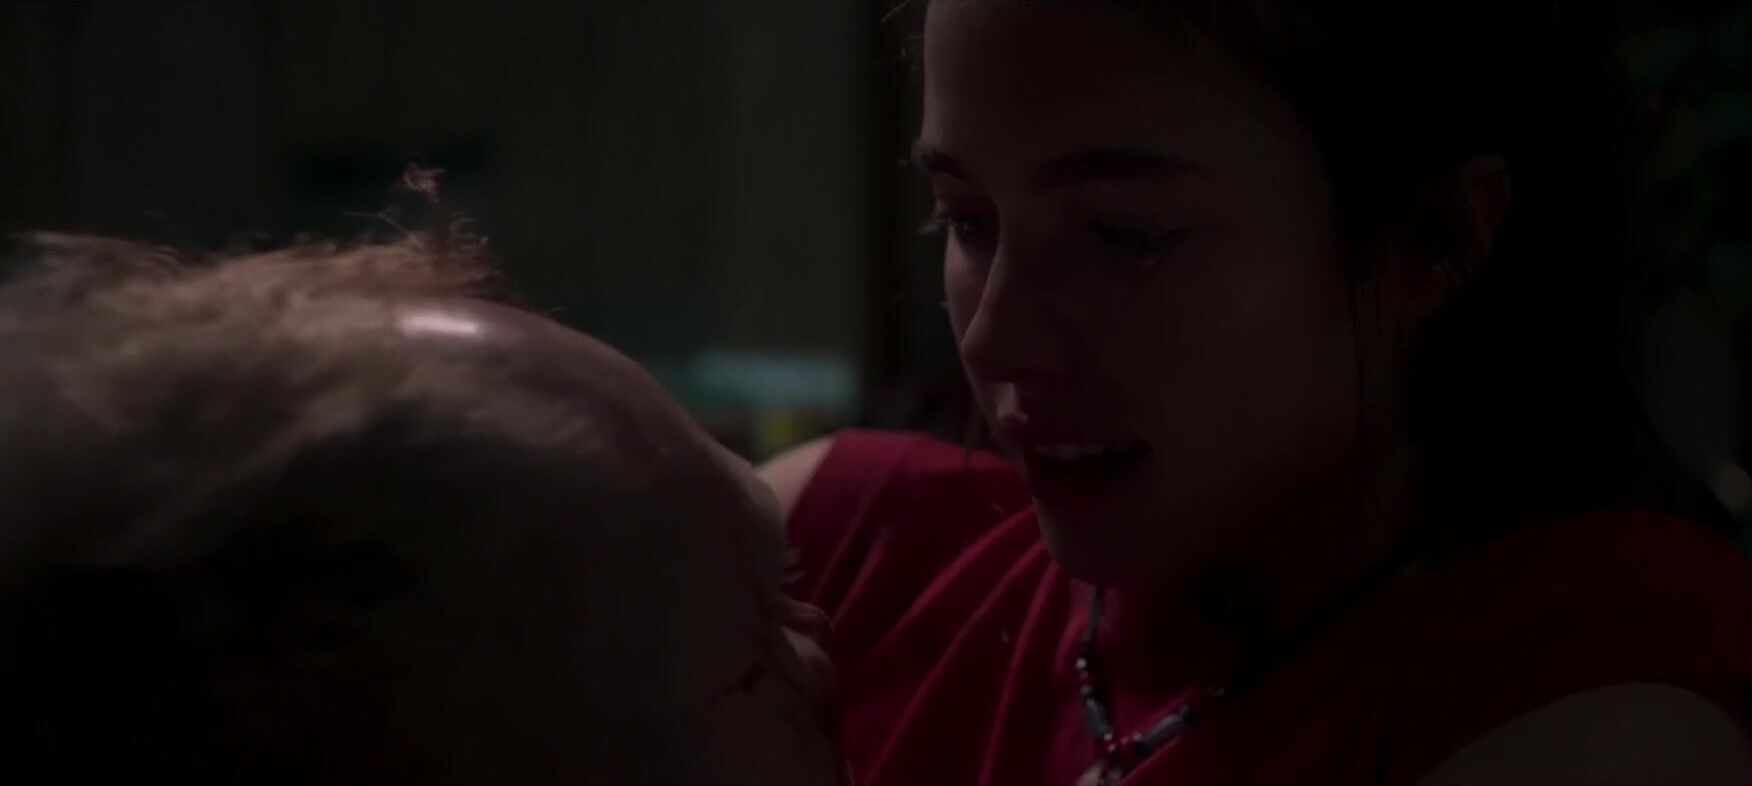 Ebony Nude and sex moments of skinny sexual pervert Margaret Qualley from Donnybrook (2018) TNAFlix